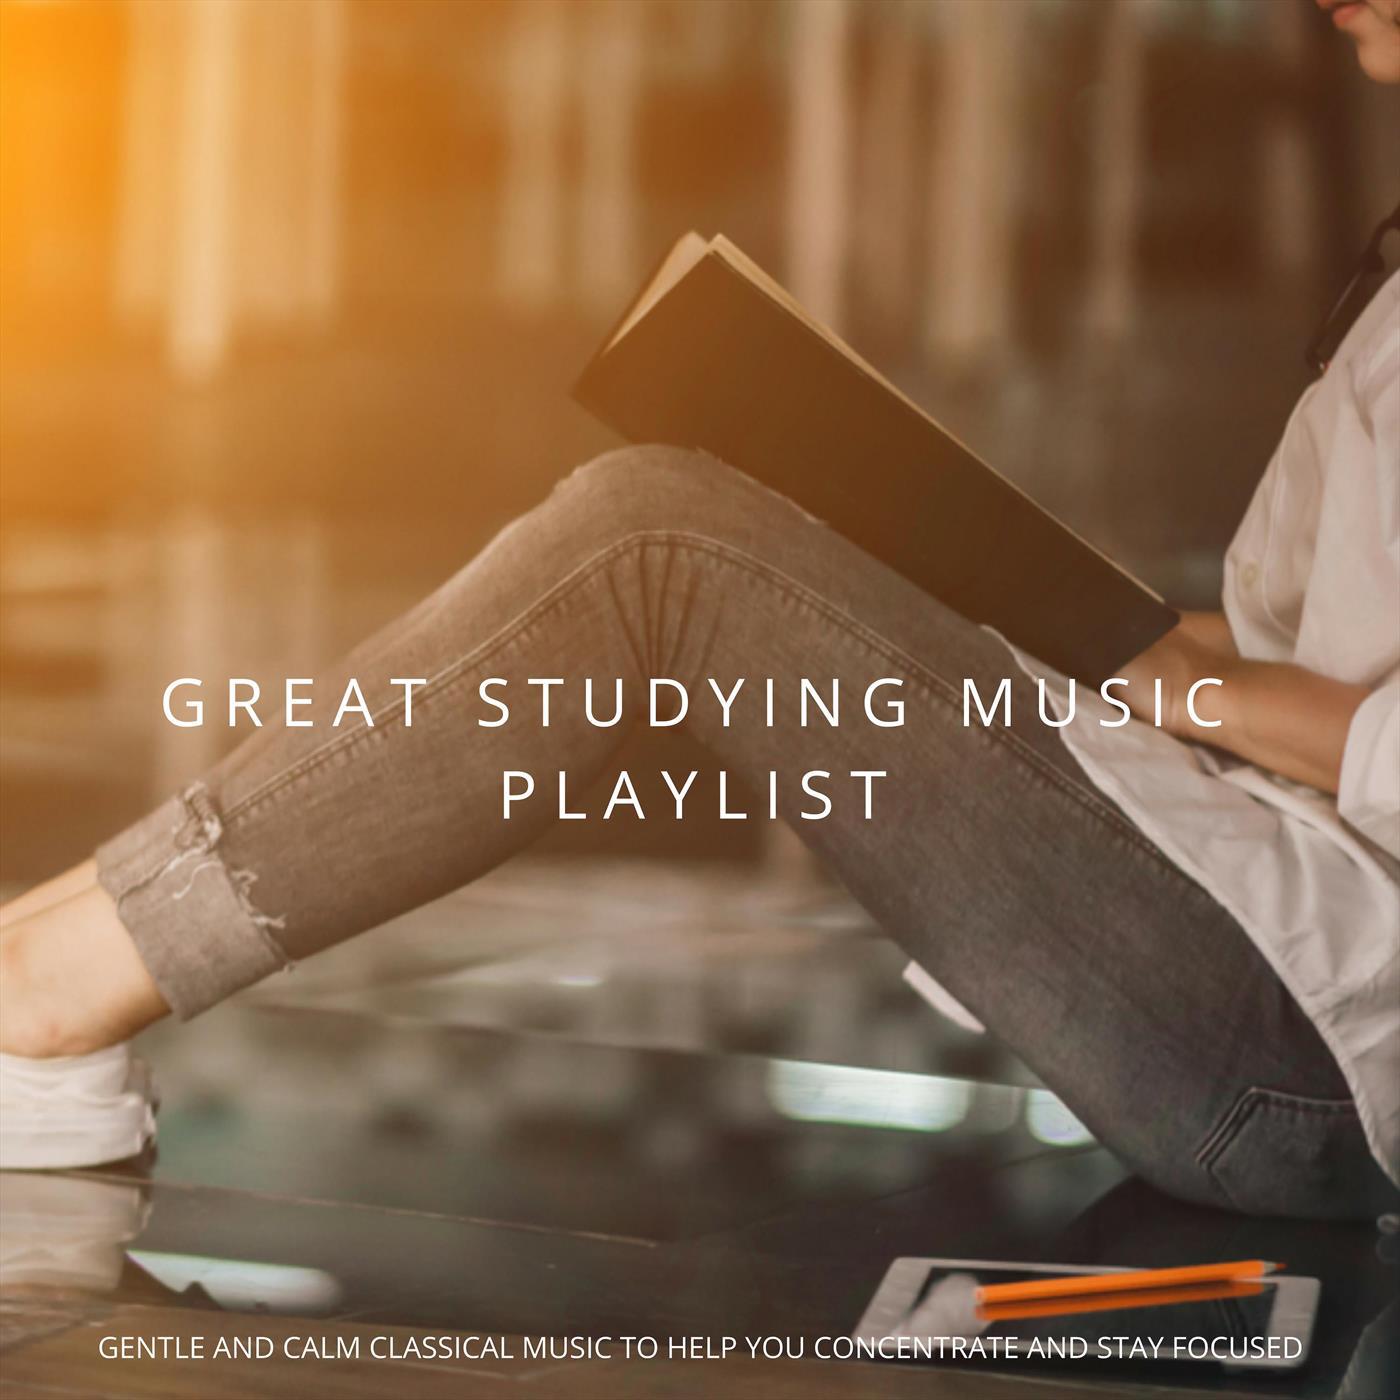 Great Studying Music Playlist: Gentle and Calm Classical Music to Help You Concentrate and Stay Focused